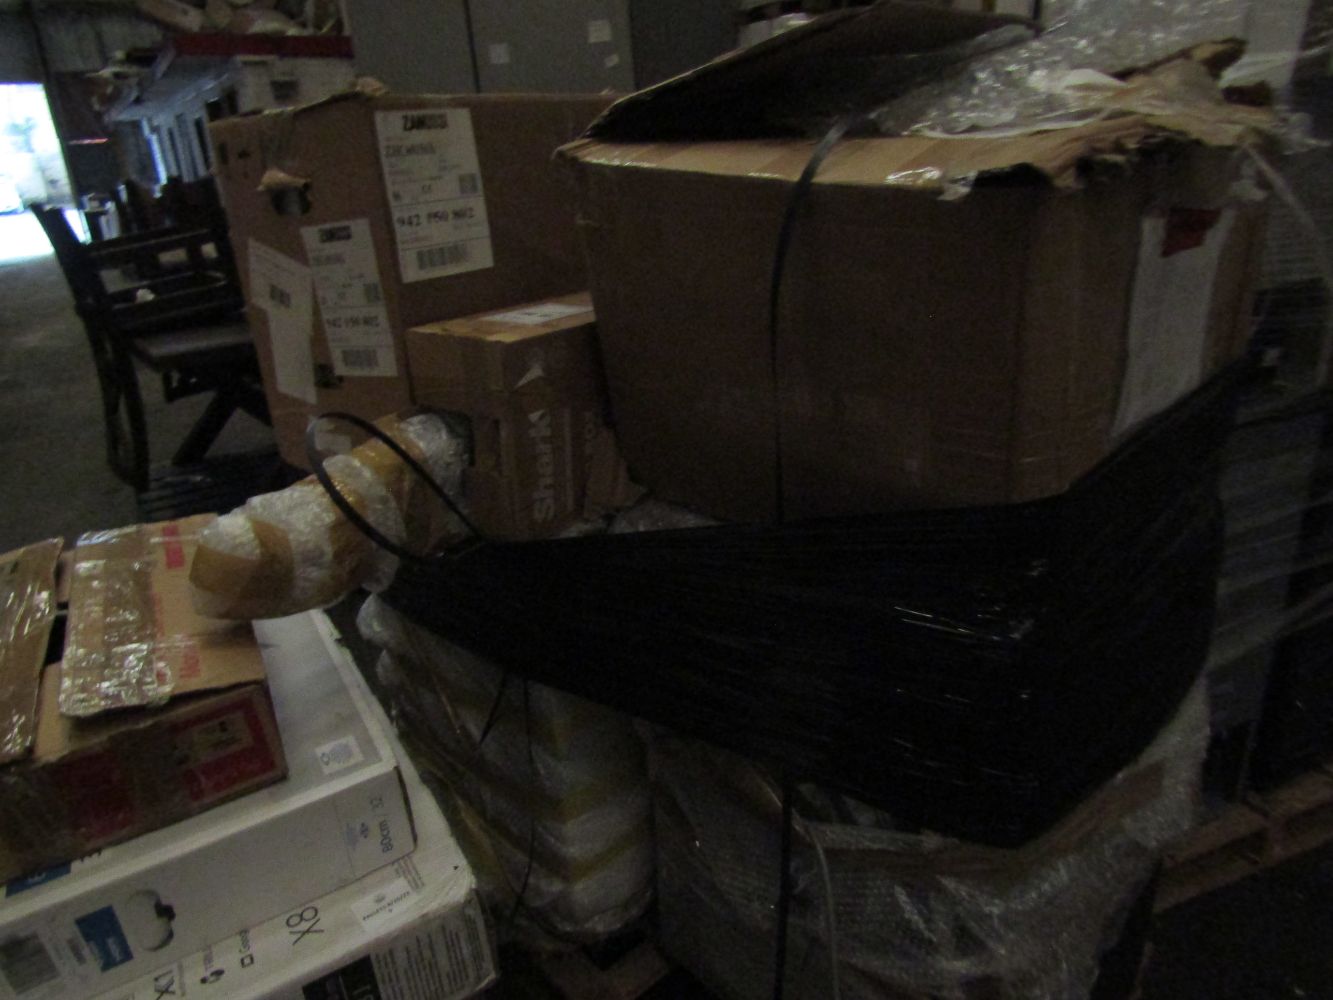 Pallets of Smashed TV's, Overstock and Electrical returns items